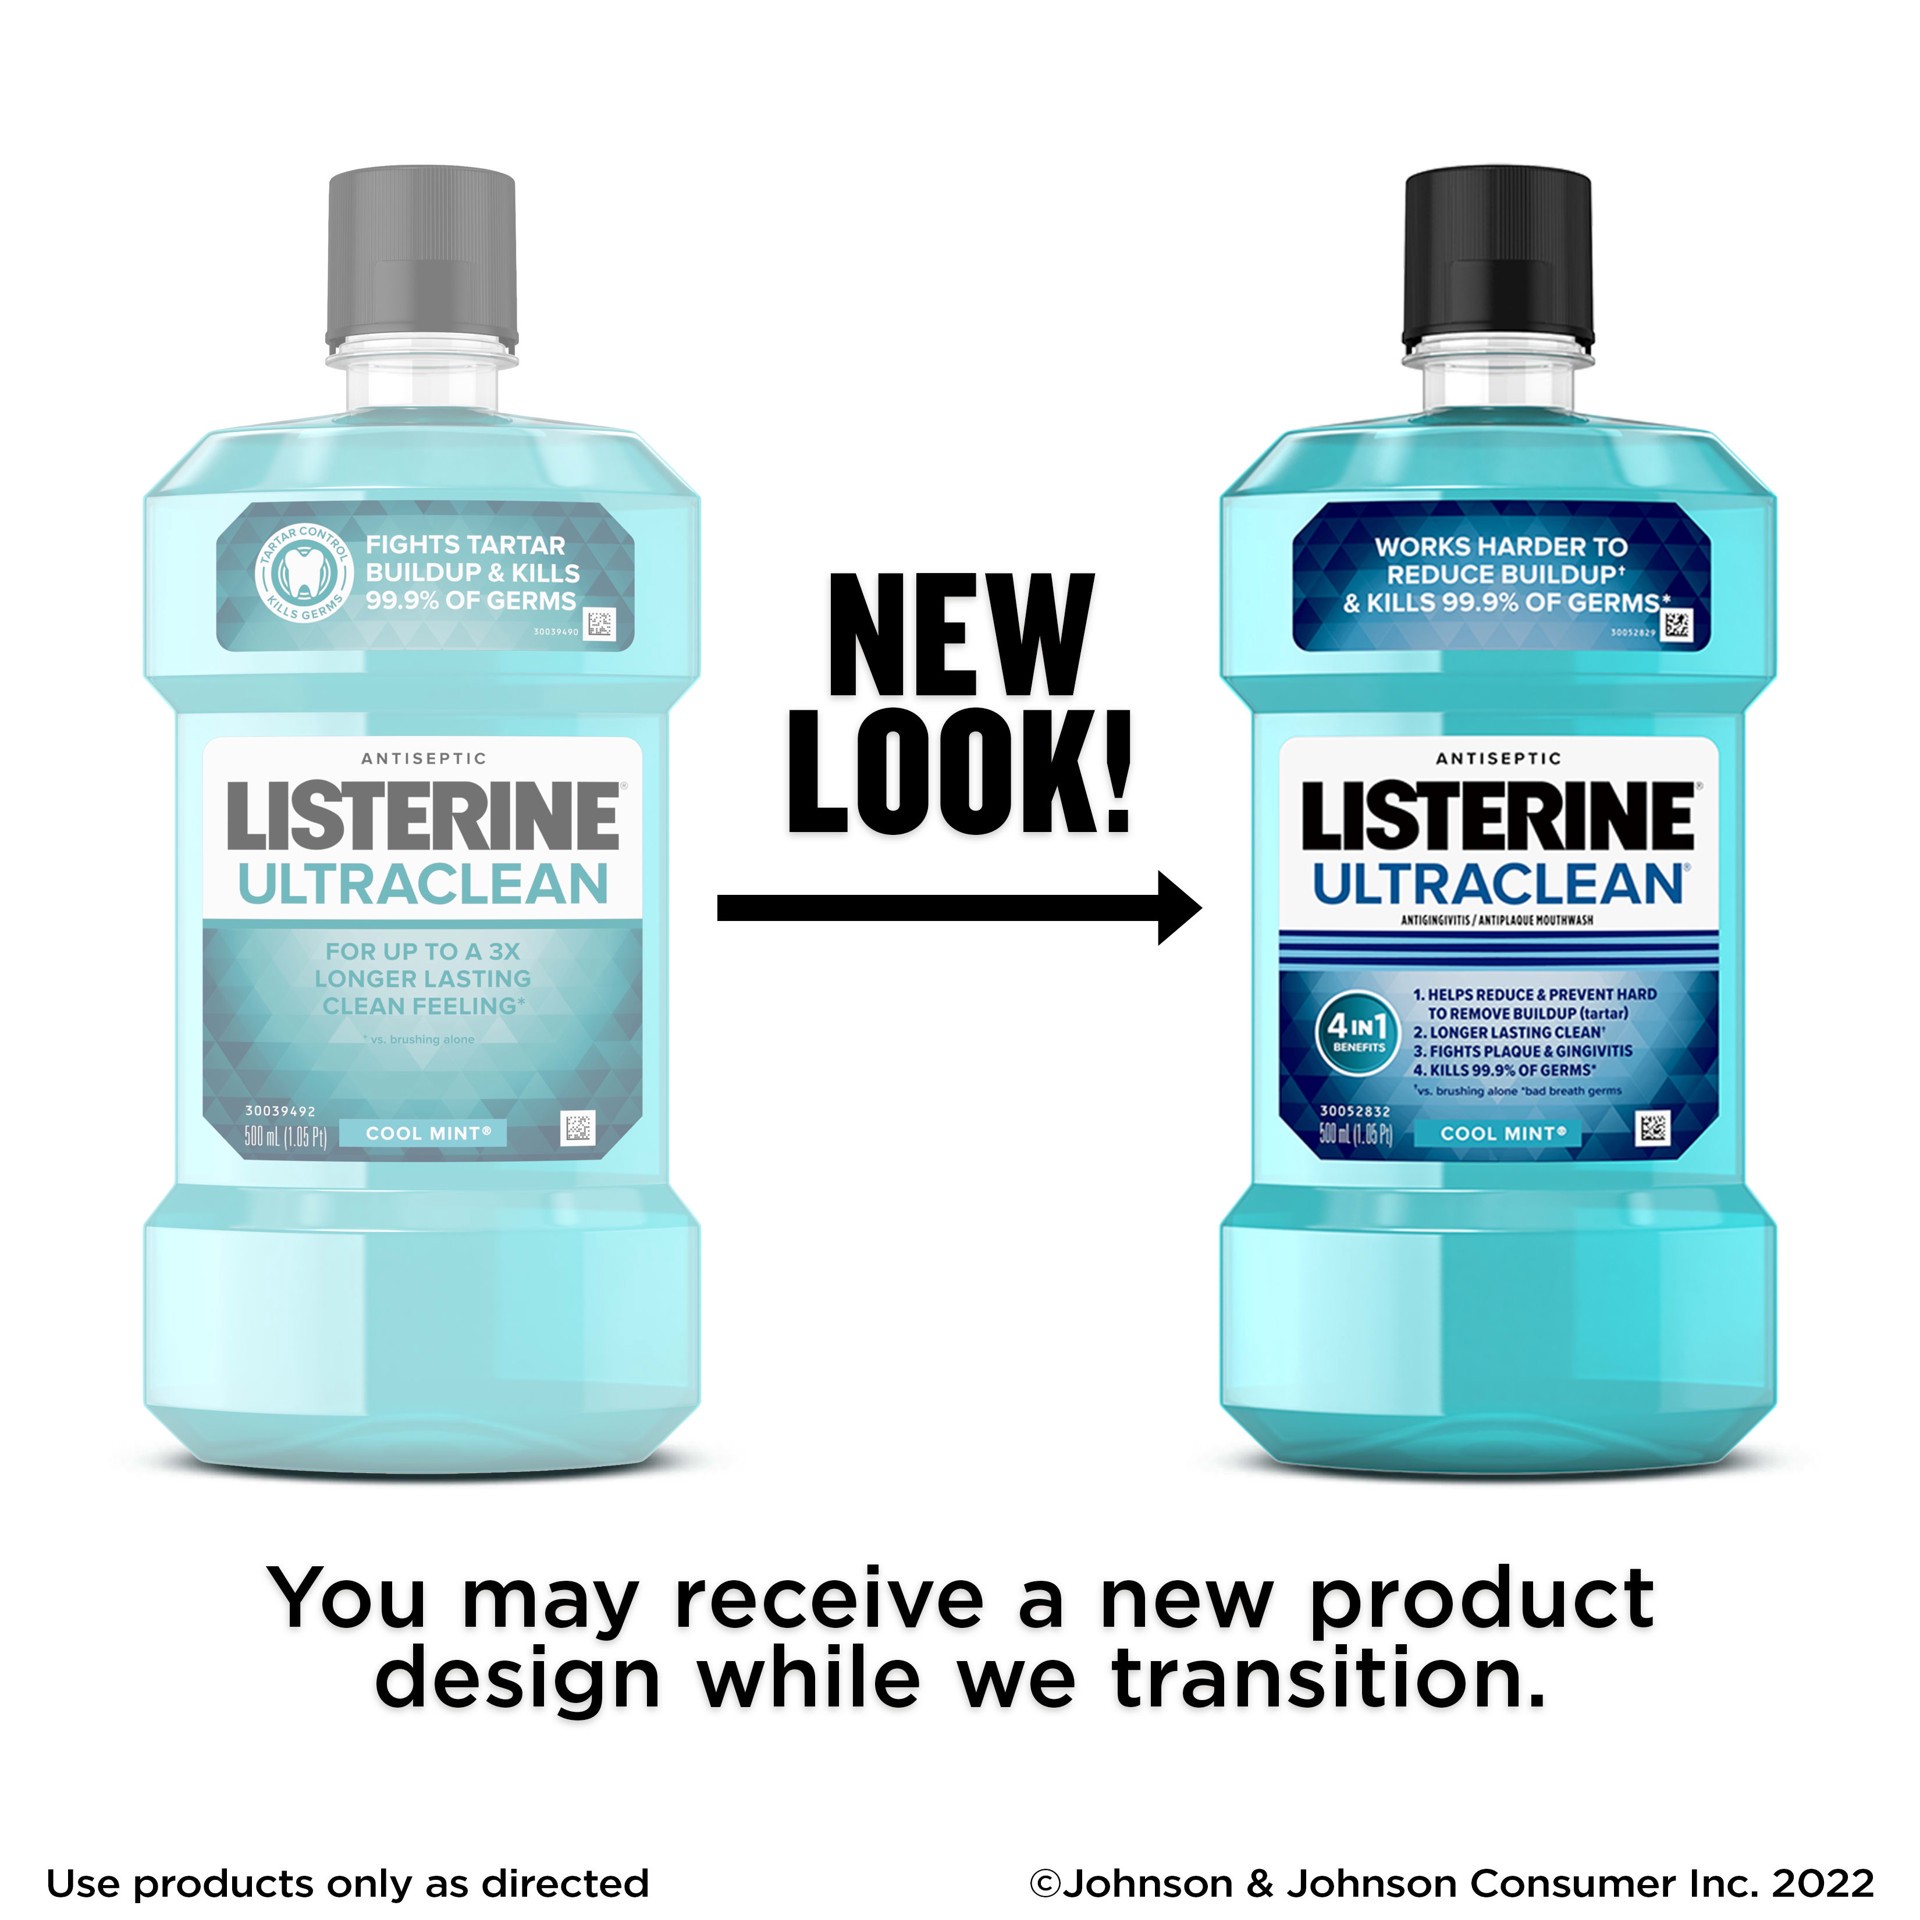 slide 10 of 10, Listerine Ultraclean Oral Care Antiseptic Mouthwash, Everfresh Technology to Help Fight Bad Breath, Gingivitis, Plaque & Tartar, ADA-Accepted Tartar Control Oral Rinse, Cool Mint, 500 mL, 500 ml